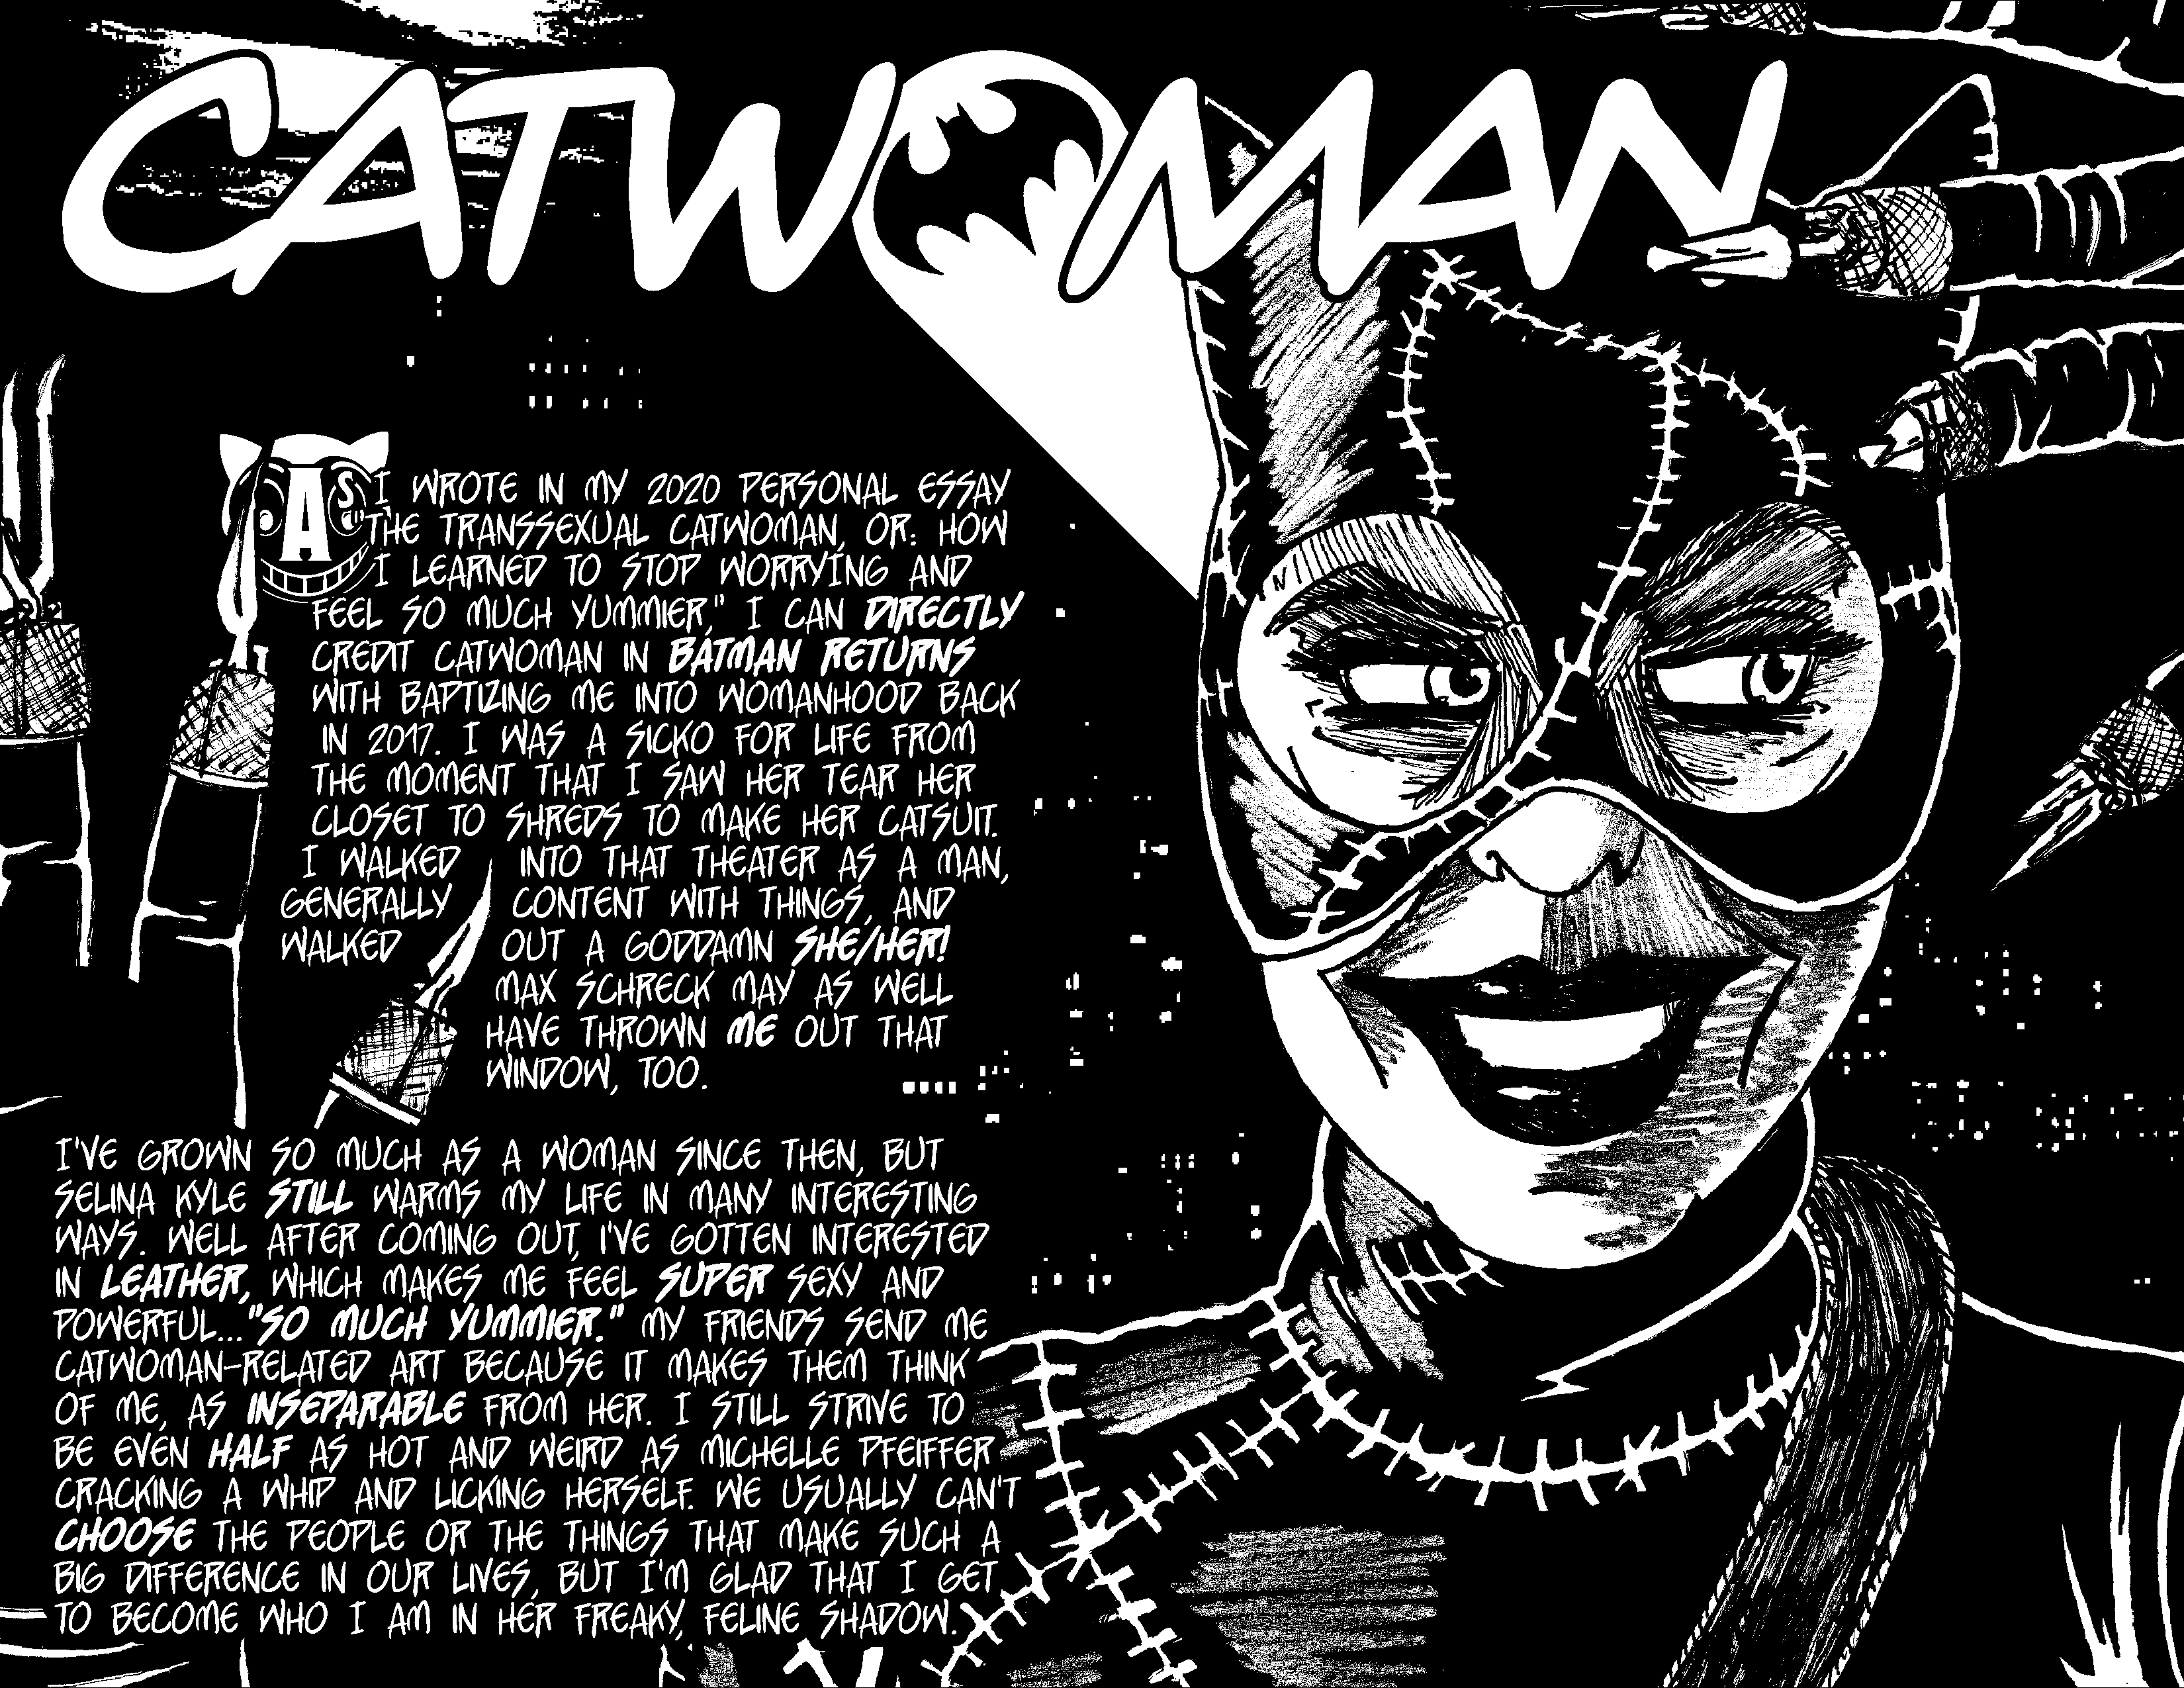 CATWOMAN — As I wrote in my 2020 personal essay 'The Transsexual Catwoman, or: How I Learned to Stop Worrying and Feel So Much Yummier,' I can directly credit Catwoman in Batman Returns with baptizing me into womanhood back in 2017. I was a sicko for life from the moment that I saw her tear her closet to shreds to make her catsuit. I walked into that theater as a man, generally content with things, and walked out a goddamn she/her! Max Schreck may as well have thrown me out that window, too. I've grown so much as a woman since then, but Selina Kyle still warms my life in many interesting ways. Well after coming out, I've gotten interested in leather, which makes me feel super sexy and powerful...'so much yummier.' My friends send me Catwoman-related art because it makes them think of me, as inseparable from her. I still strive to be even half as hot and weird as Michelle Pfeiffer cracking a whip and licking herself. We usually can't choose the people or the things that make such a big difference in our lives, but I'm glad that I get to become who I am in her freaky, feline shadow.